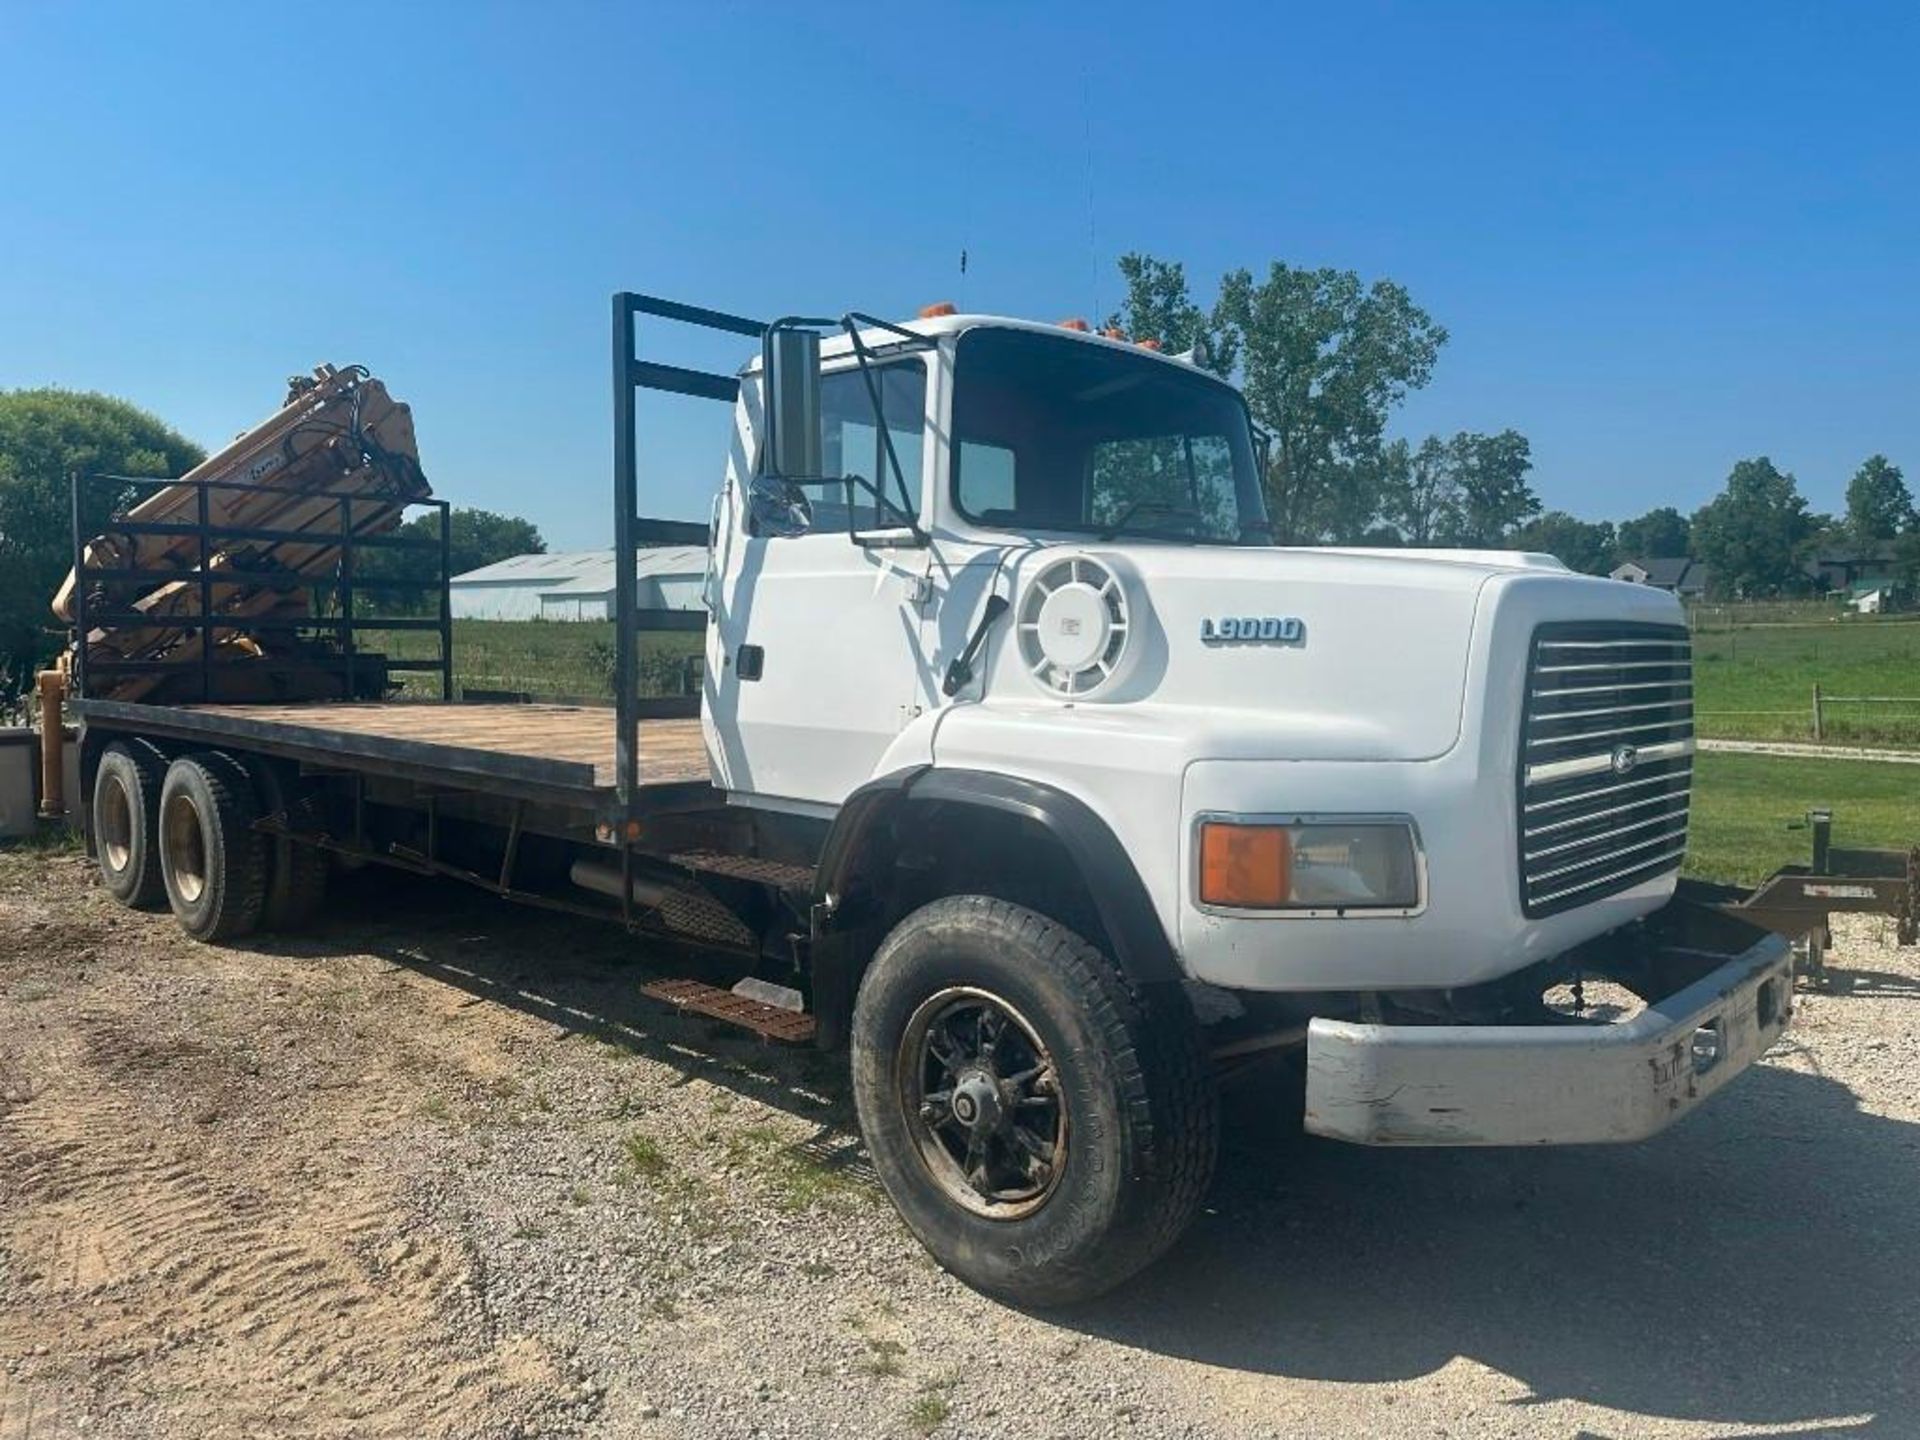 1995 Ford L9000 truck with Copma C2330/3 knuckle boom, 6x4, Caterpillar 3306 diesel engine, 111,